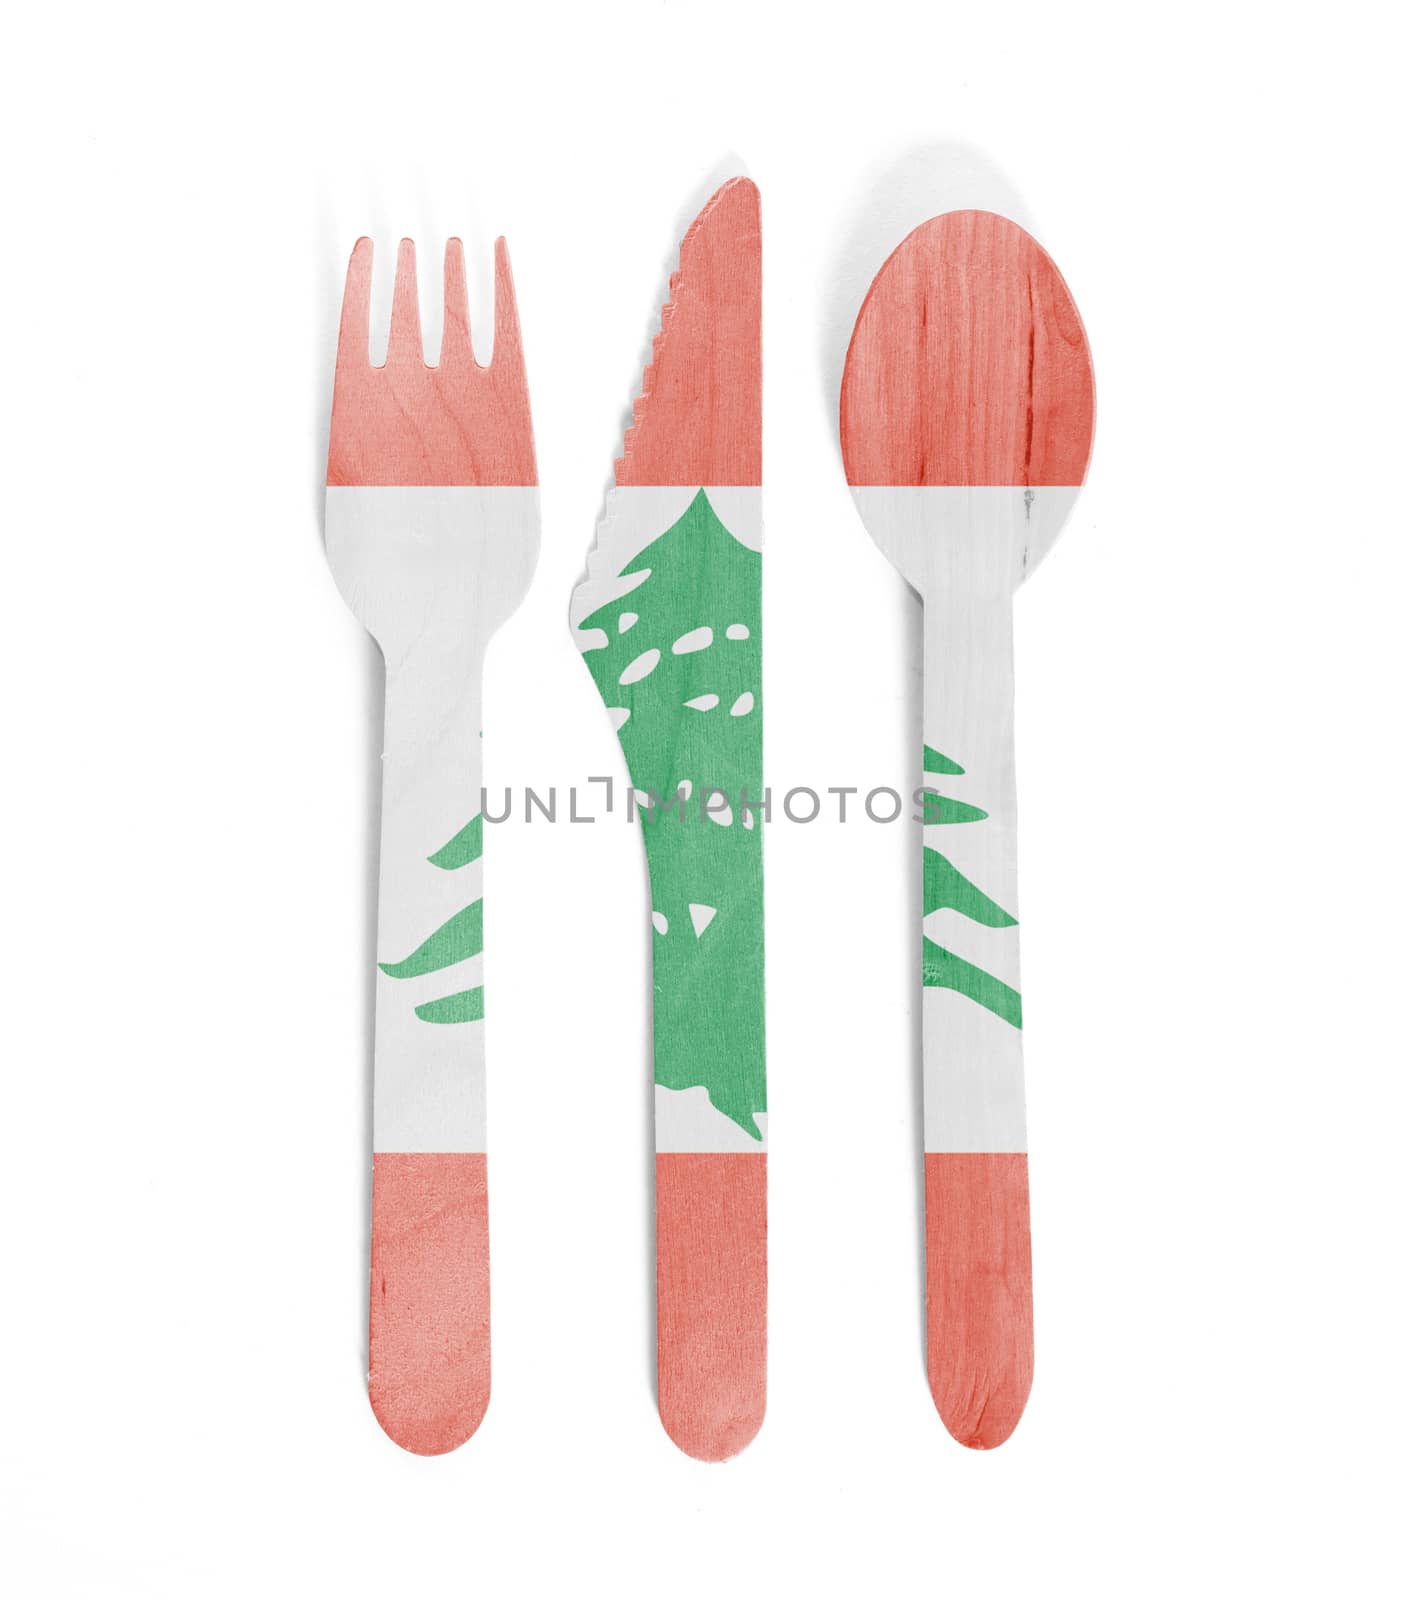 Eco friendly wooden cutlery - Plastic free concept - Isolated - Flag of Lebanon